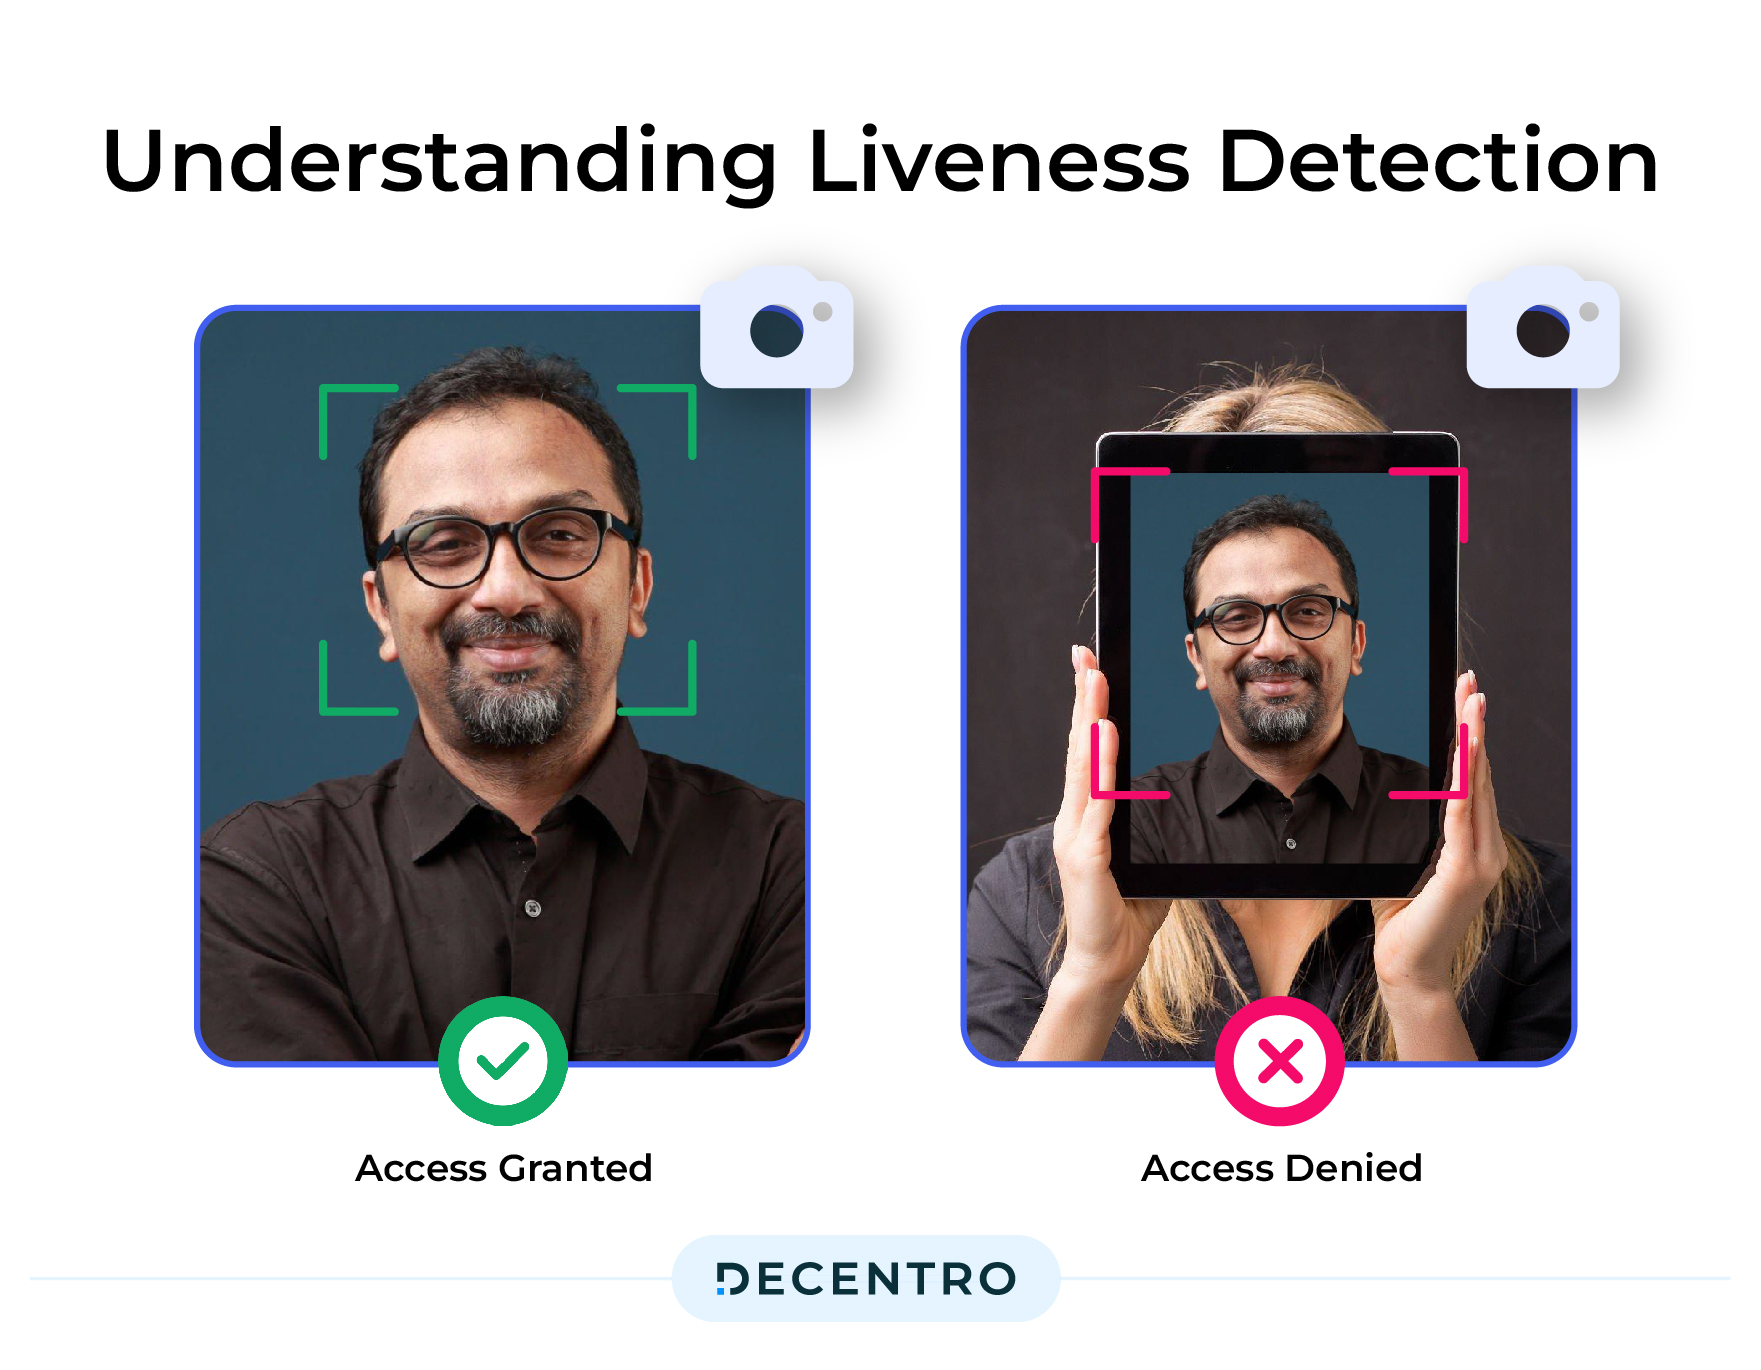 what is liveness detection